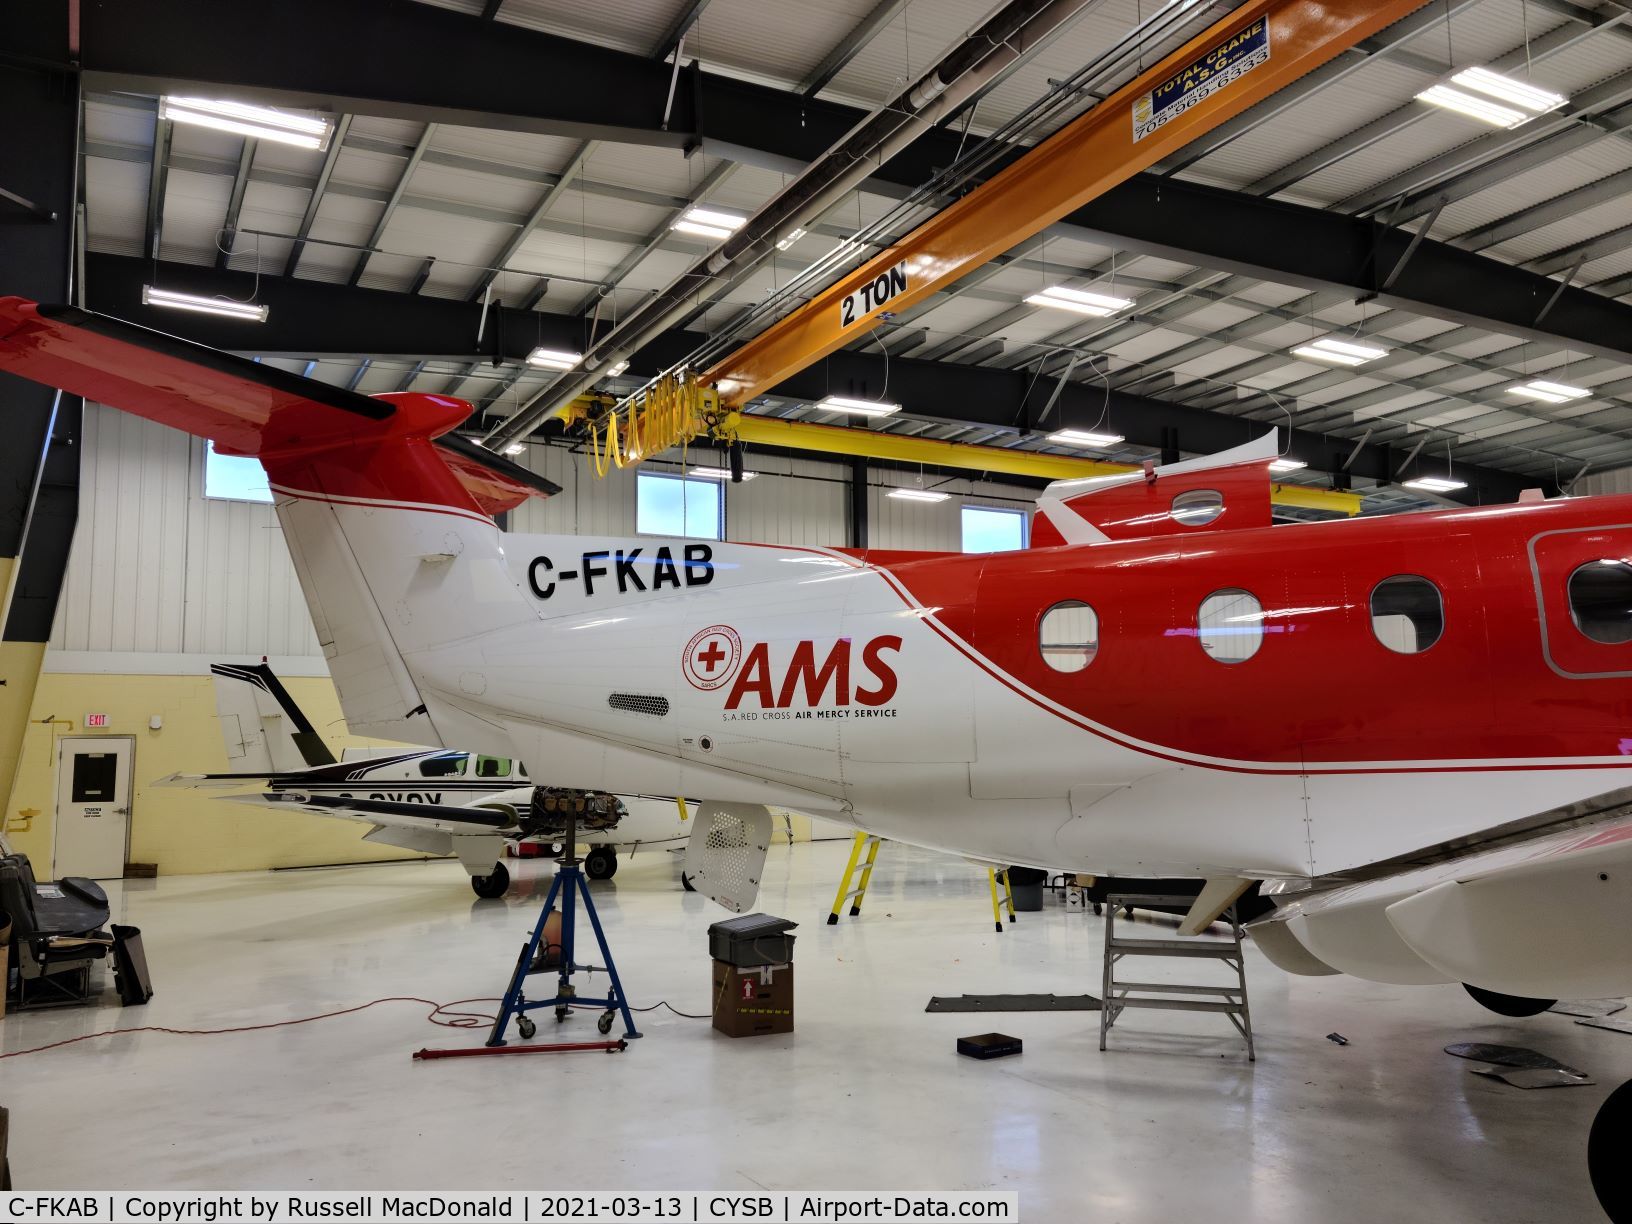 C-FKAB, 2005 Pilatus PC-12/45 C/N 634, just arrived (along with another PC-12 from ZA same source) in hangar at CYSB - undergoing maintenance and conversion to new owner